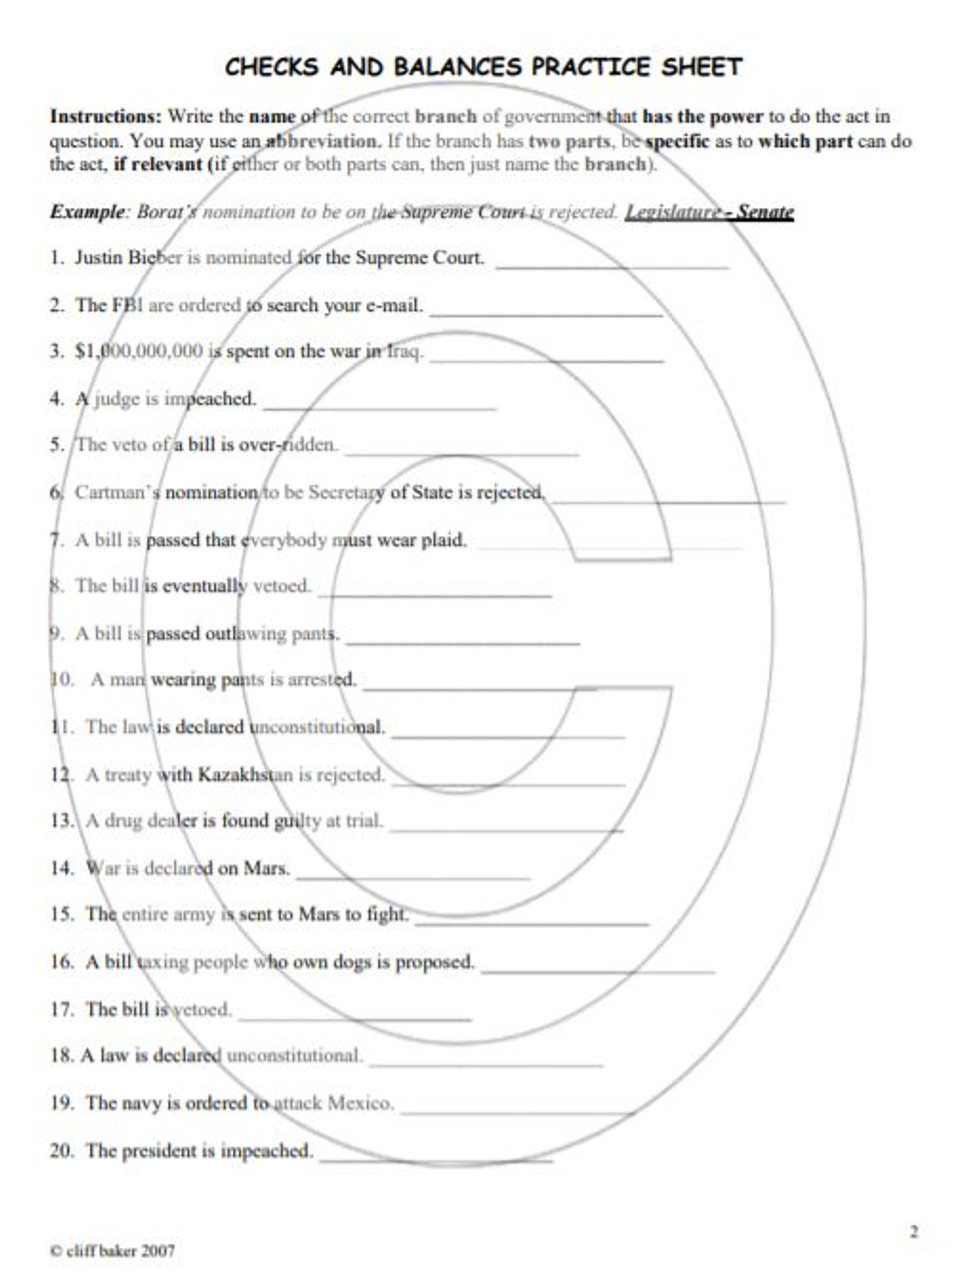 Checks and Balances practice worksheets - Amped Up Learning Inside Checks And Balances Worksheet Answers